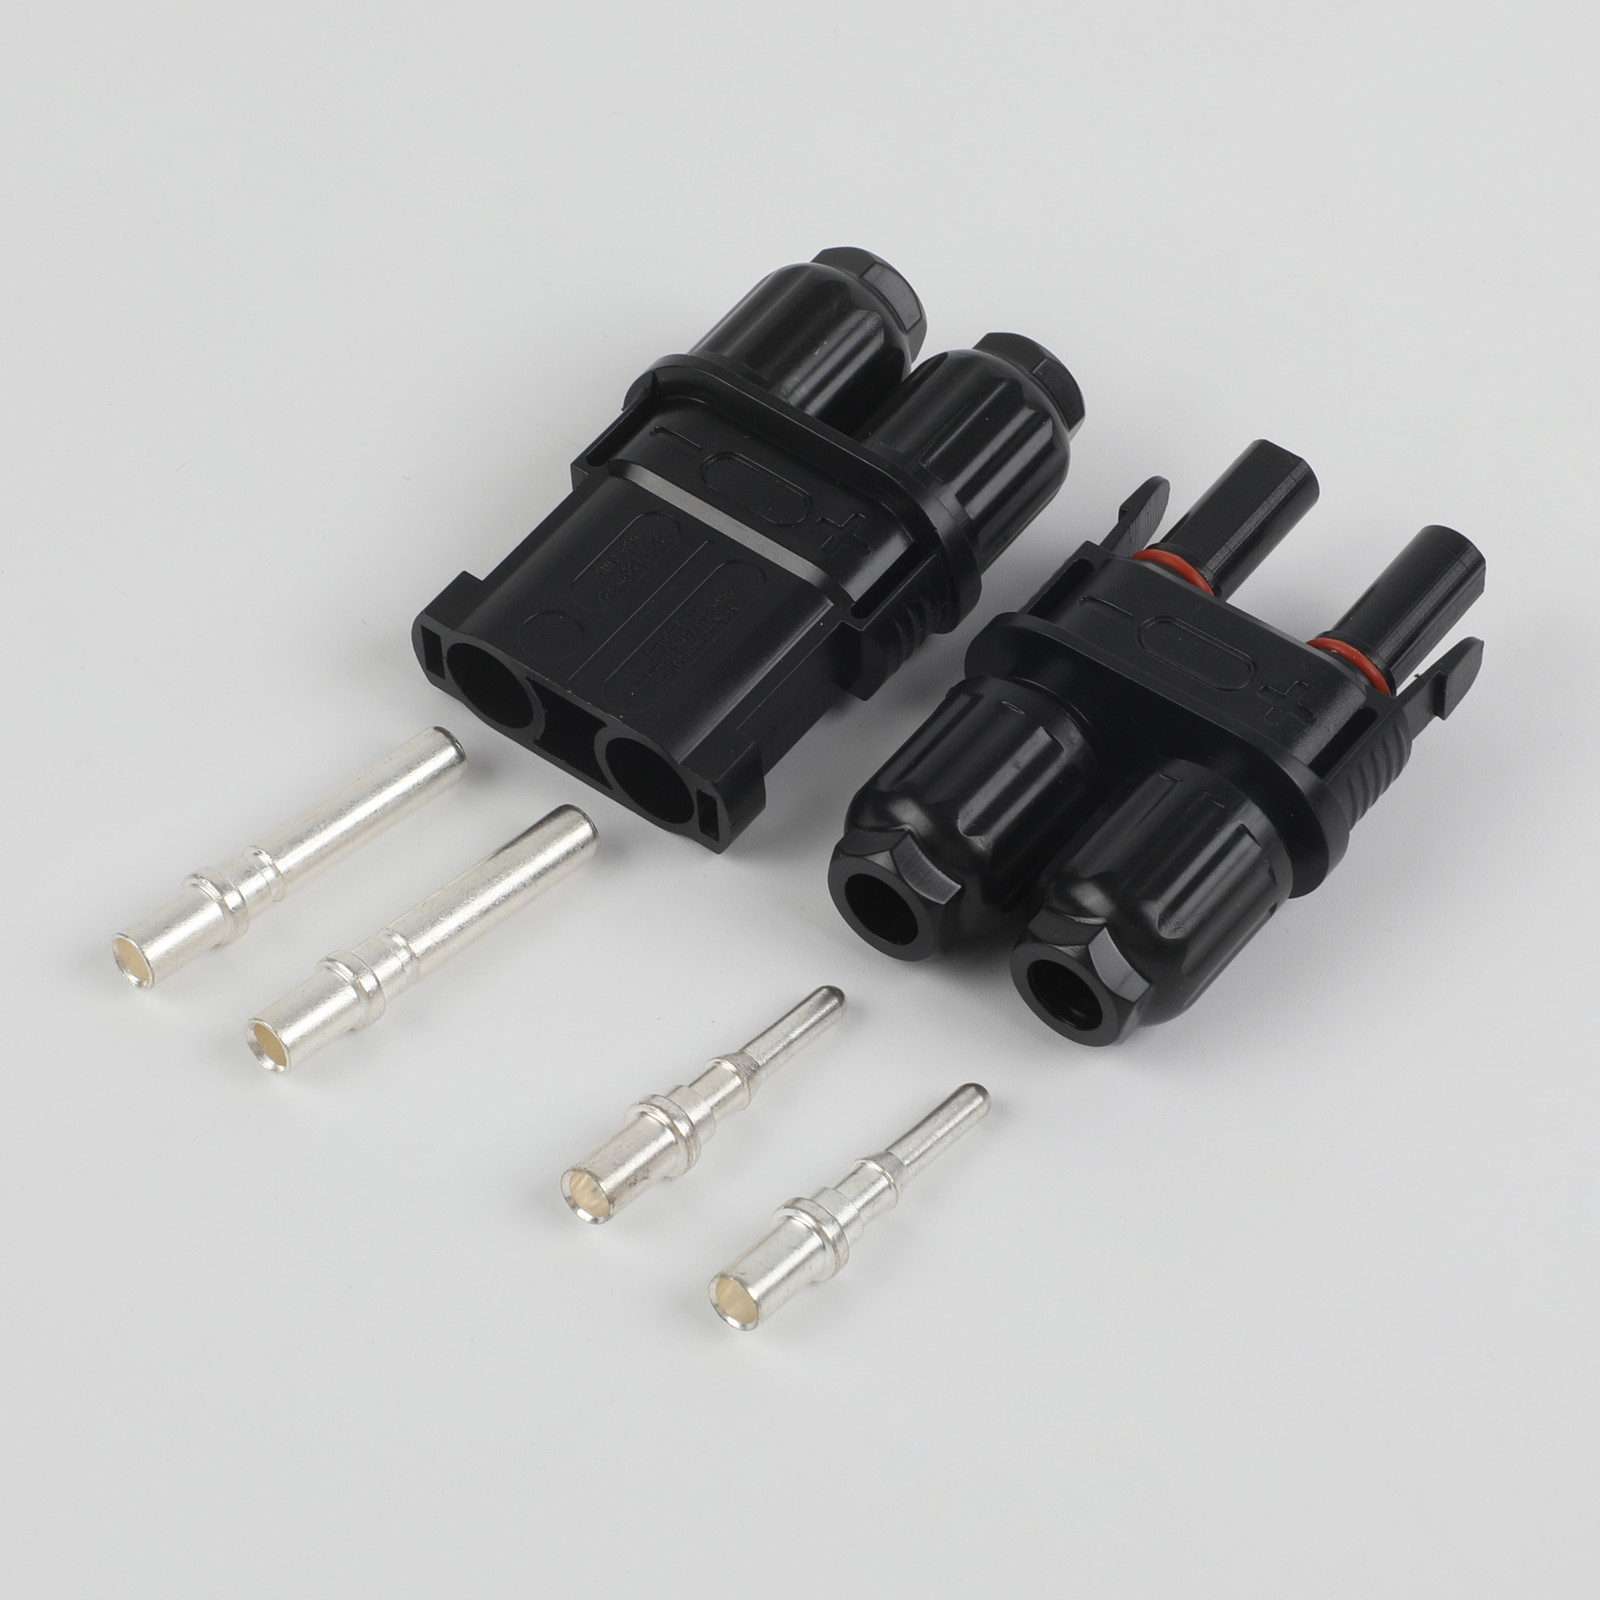 Parking Air Conditioner Waterproof Connector 50A (3)